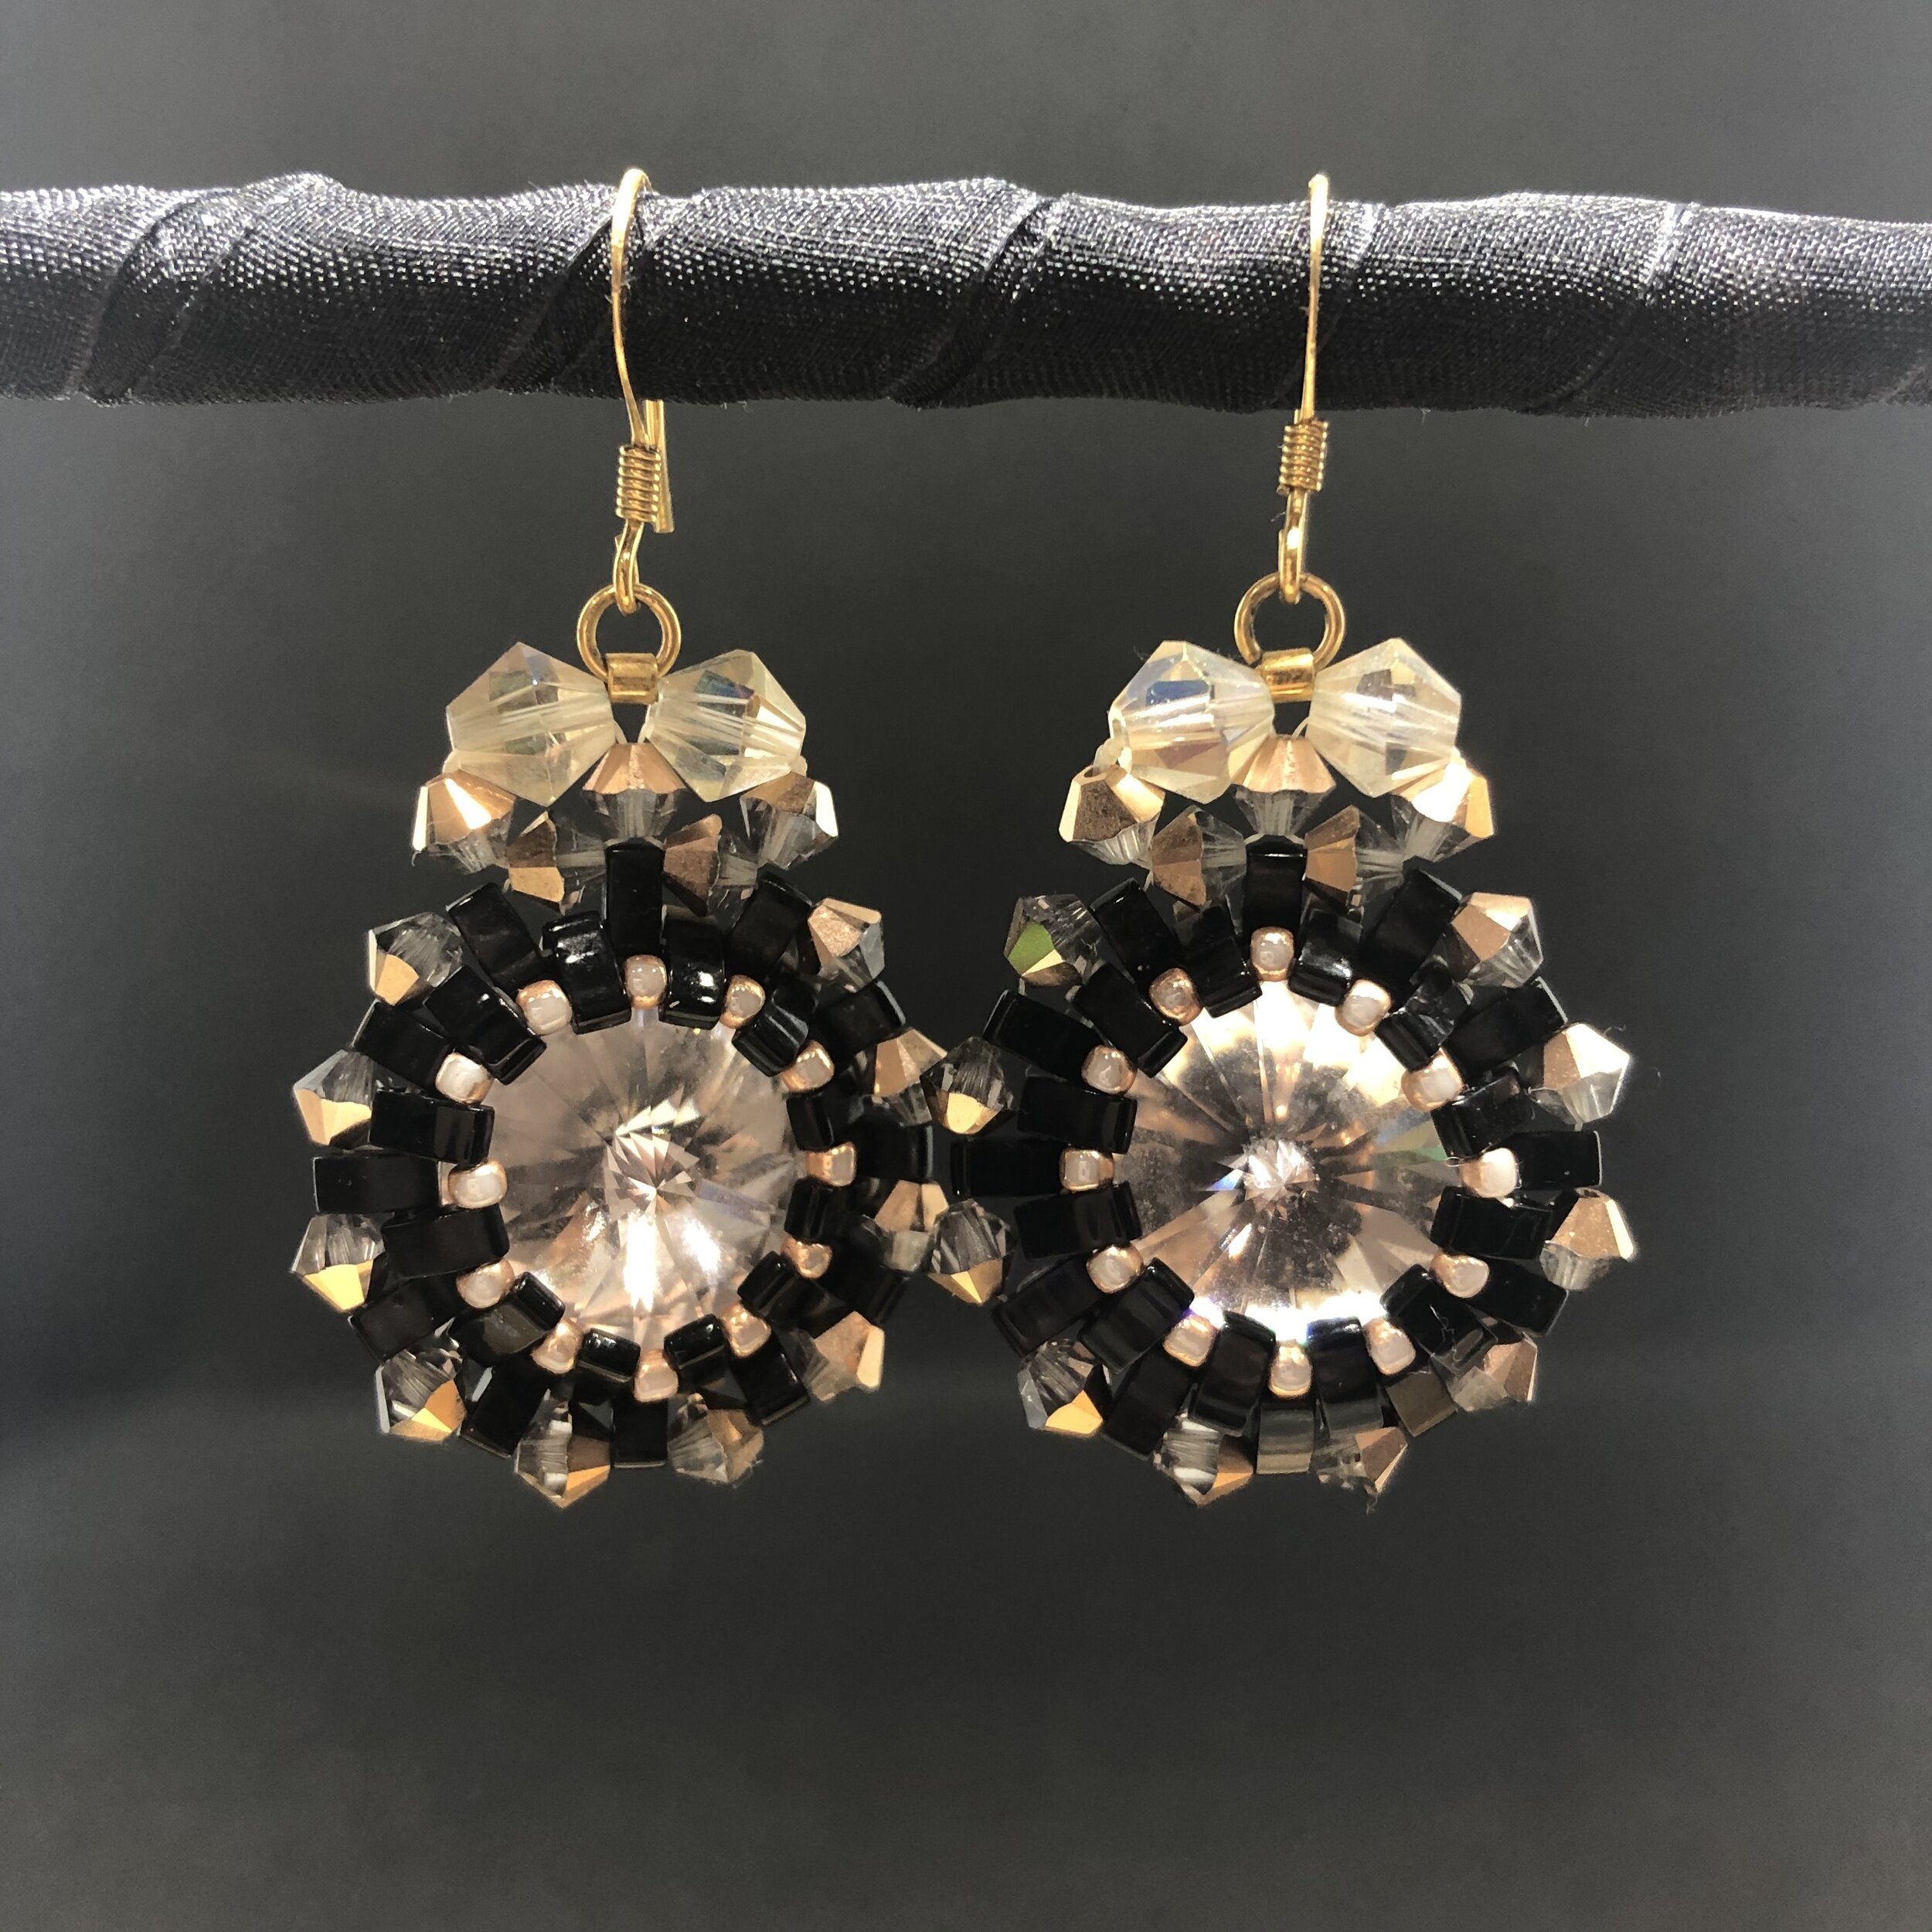 Carnivale Earrings - Gold and Black